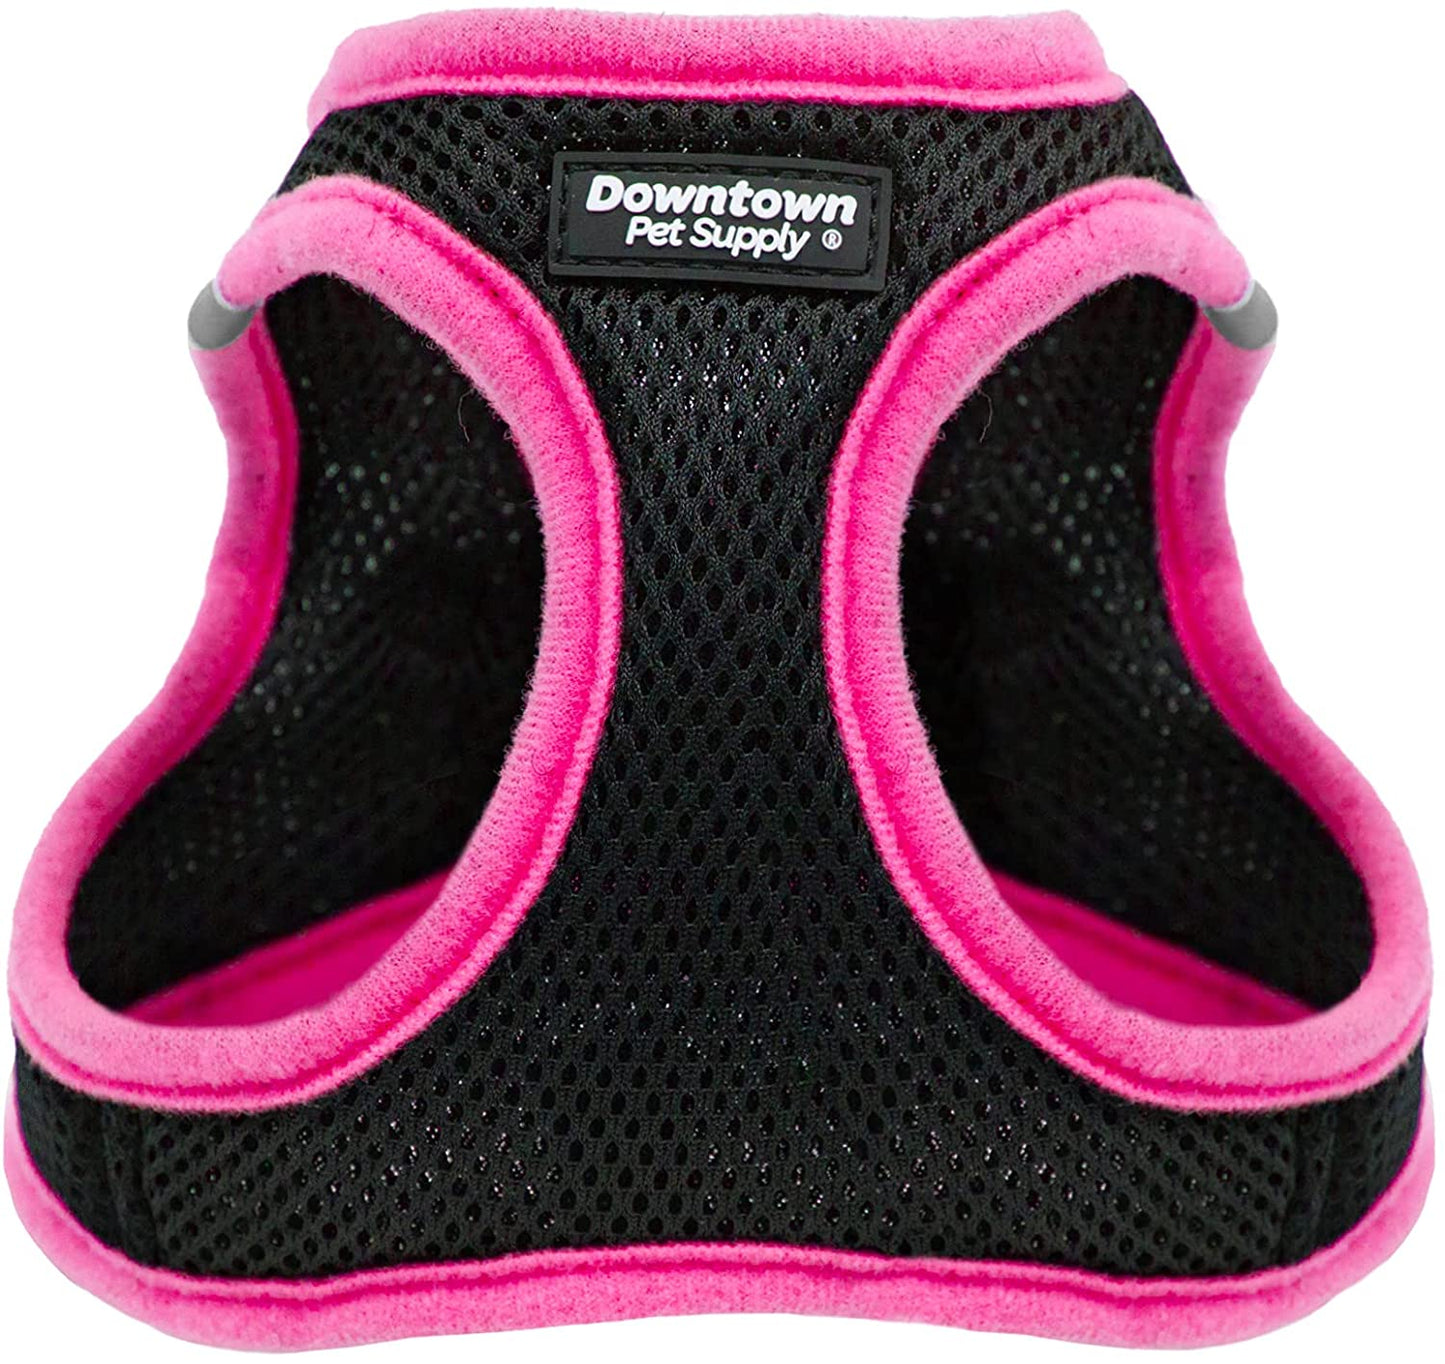 No Pull, Step in Adjustable Dog Harness with Padded Vest, Easy to Put on Small, Medium and Large Dogs